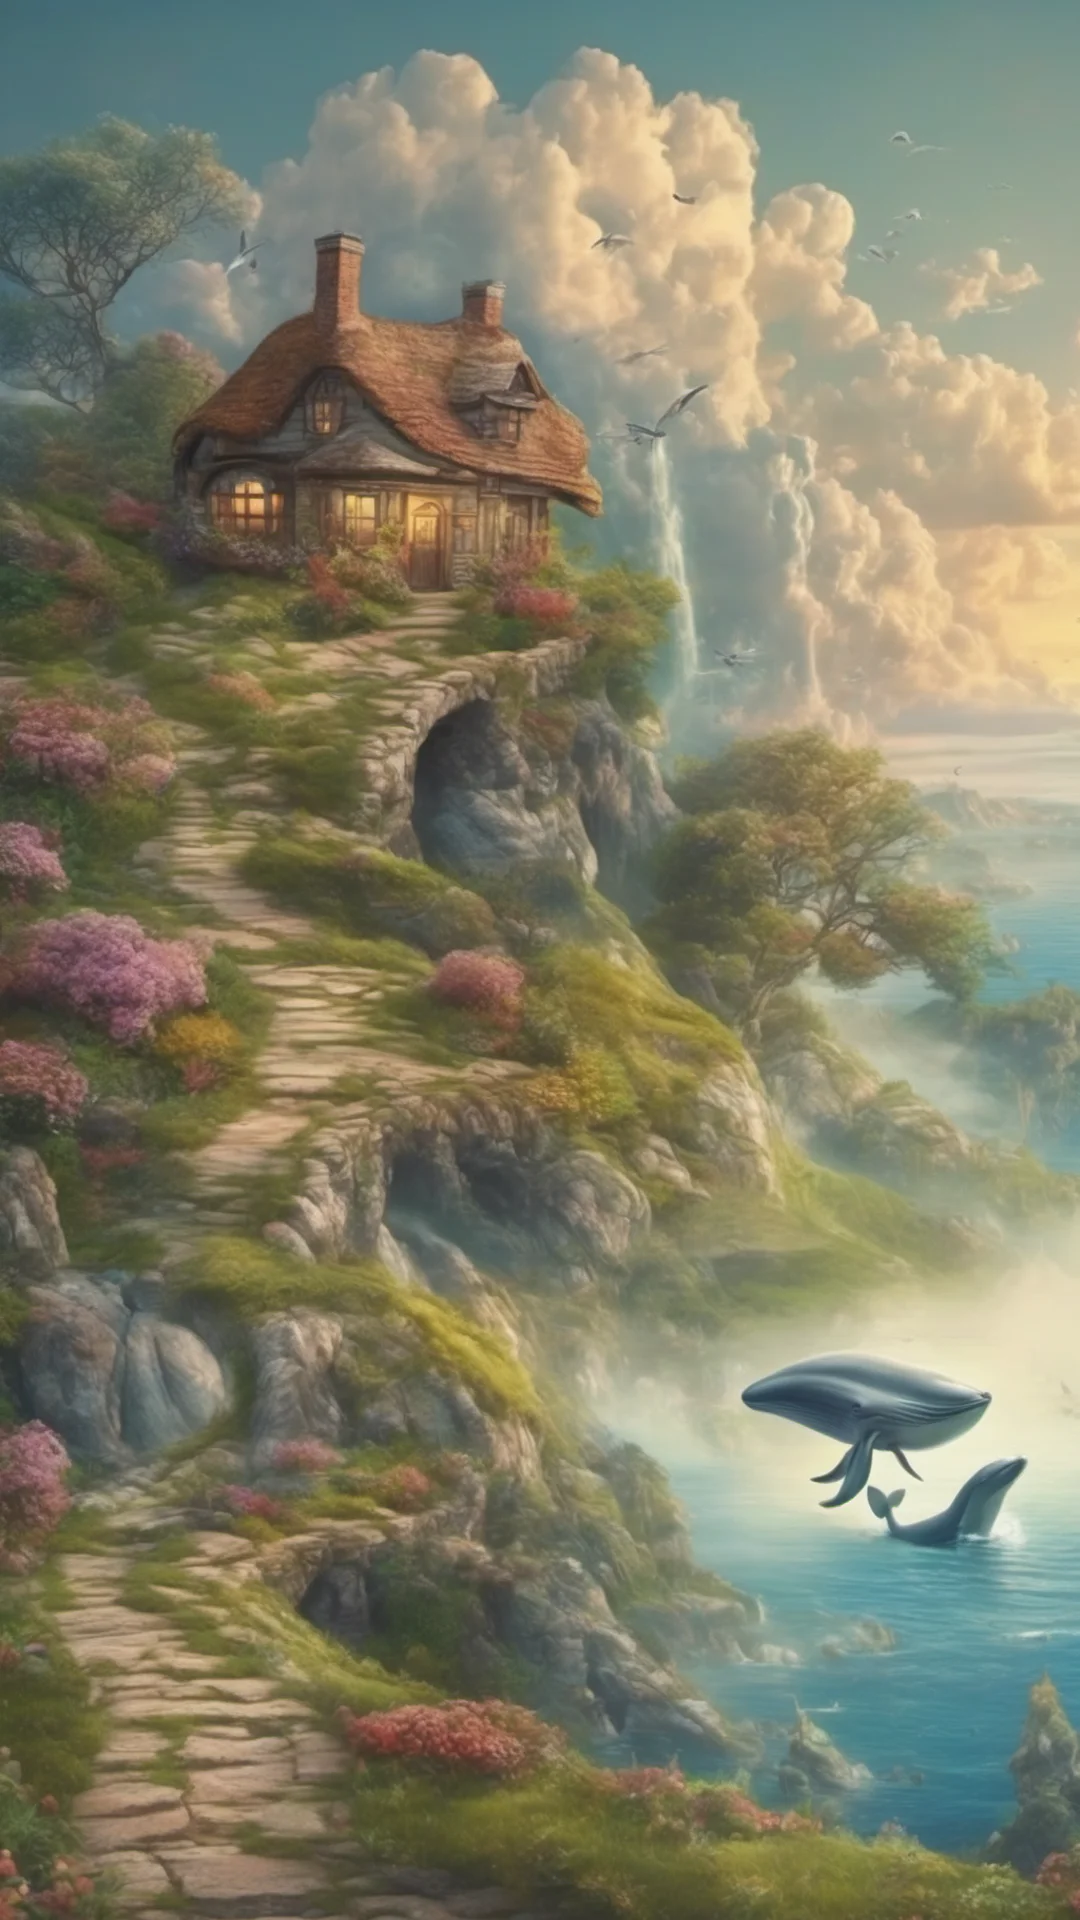 beautiful fantasy landscape flying whale cottage on path to sweeping views amazing awesome portrait 2 tall